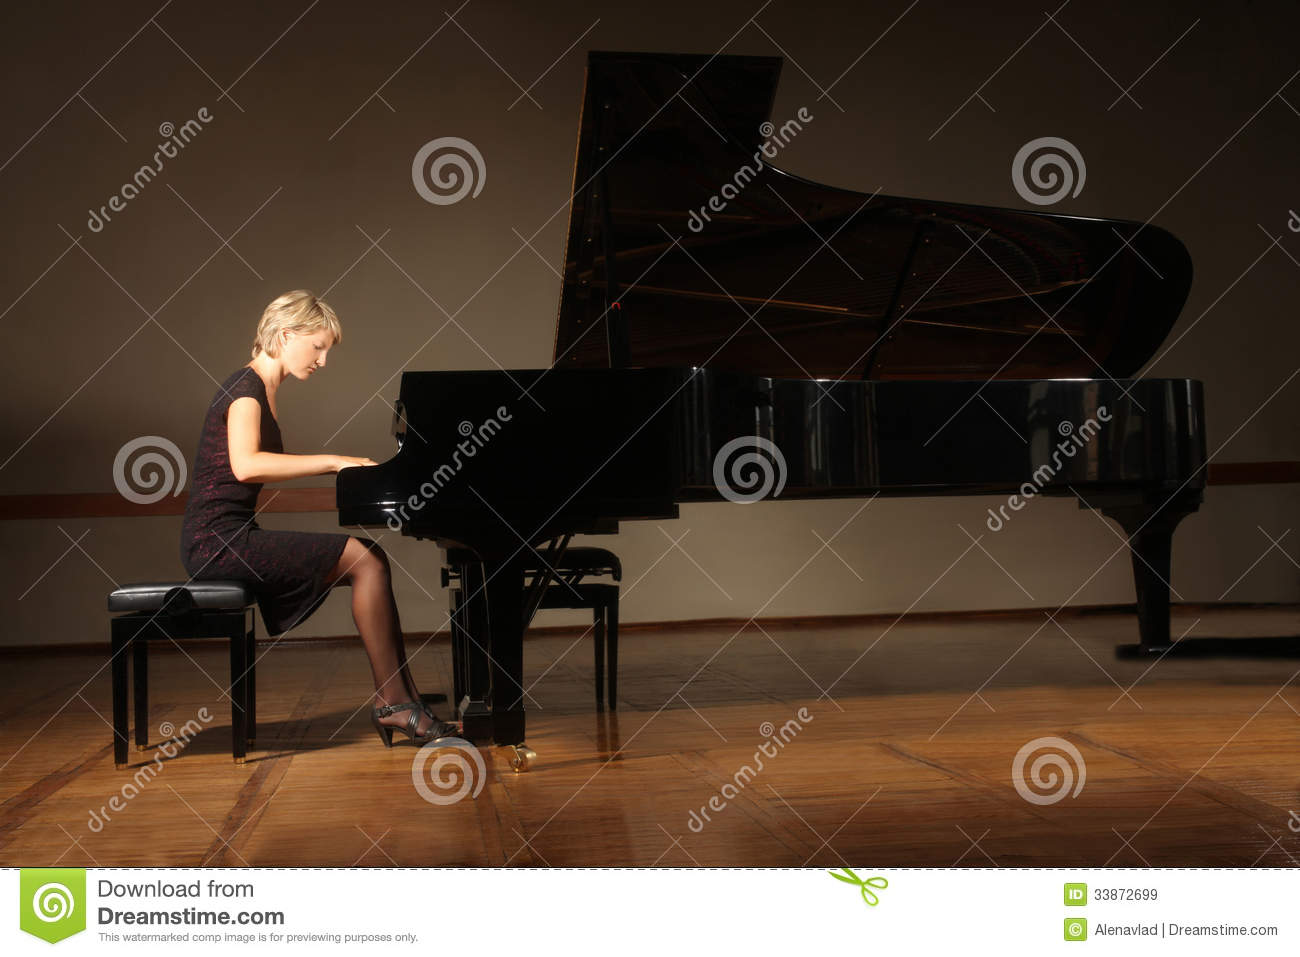 Grand Piano Pianist Playing Concert Royalty Free Stock Images   Image